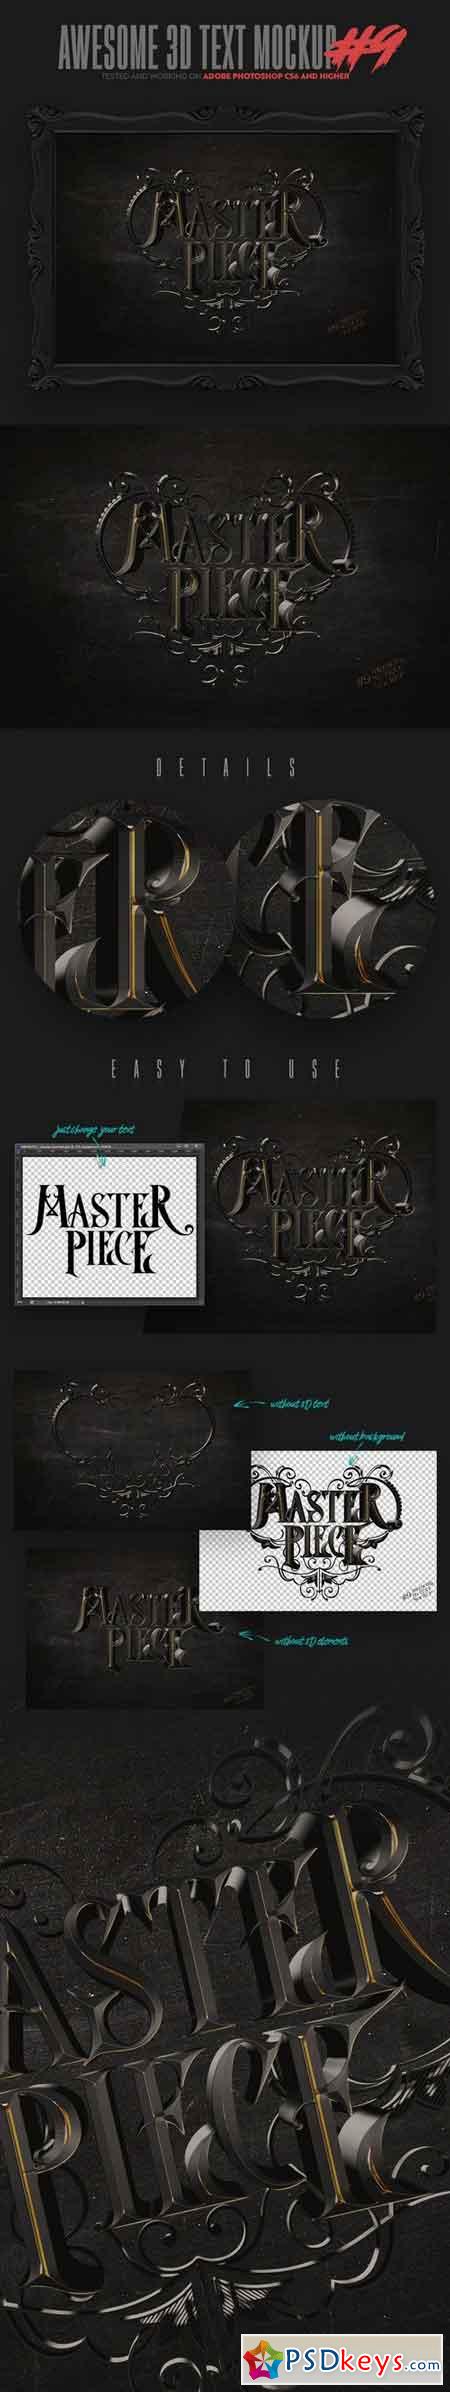 09 Awesome 3D Text Mockup - Ps CS6+ 000094